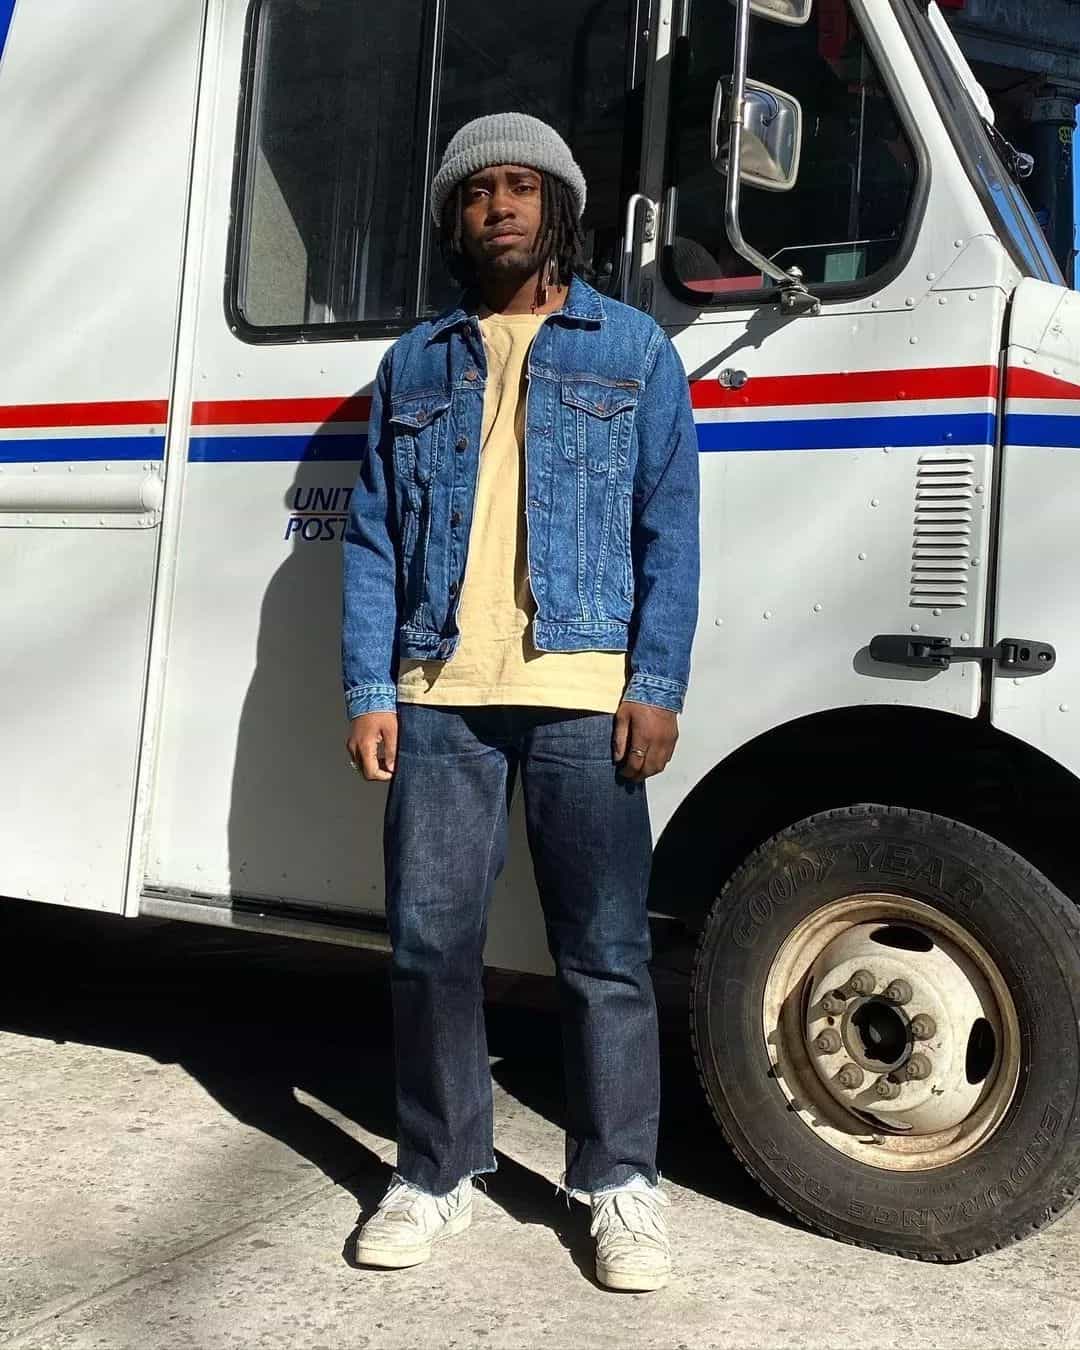 Denim Jacket and bootcuts with Delivery Truck as background